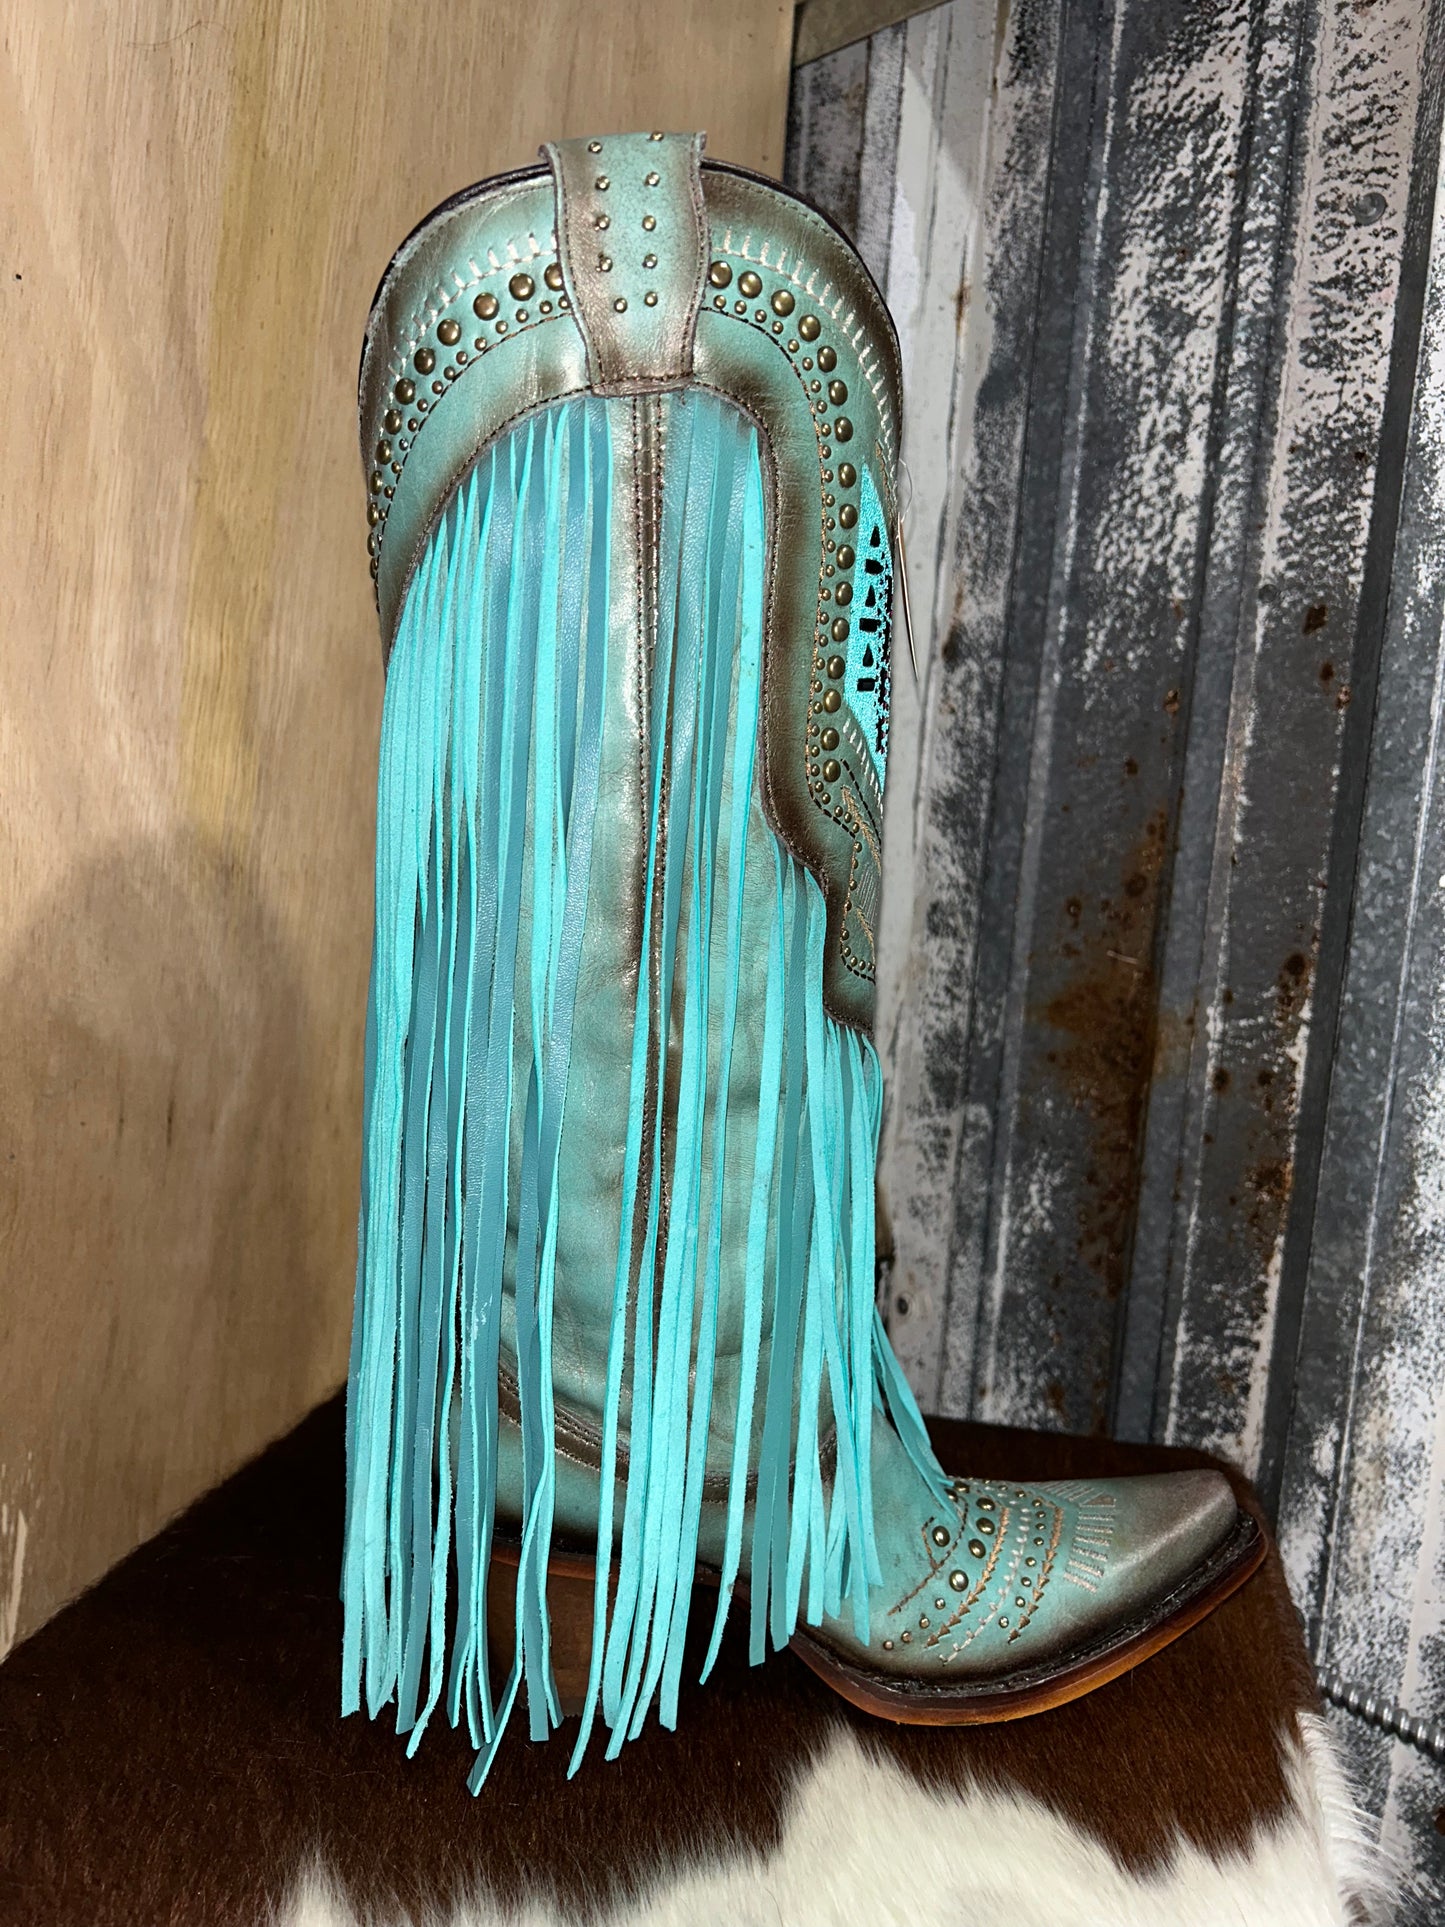 Corral Turquoise Dream boot